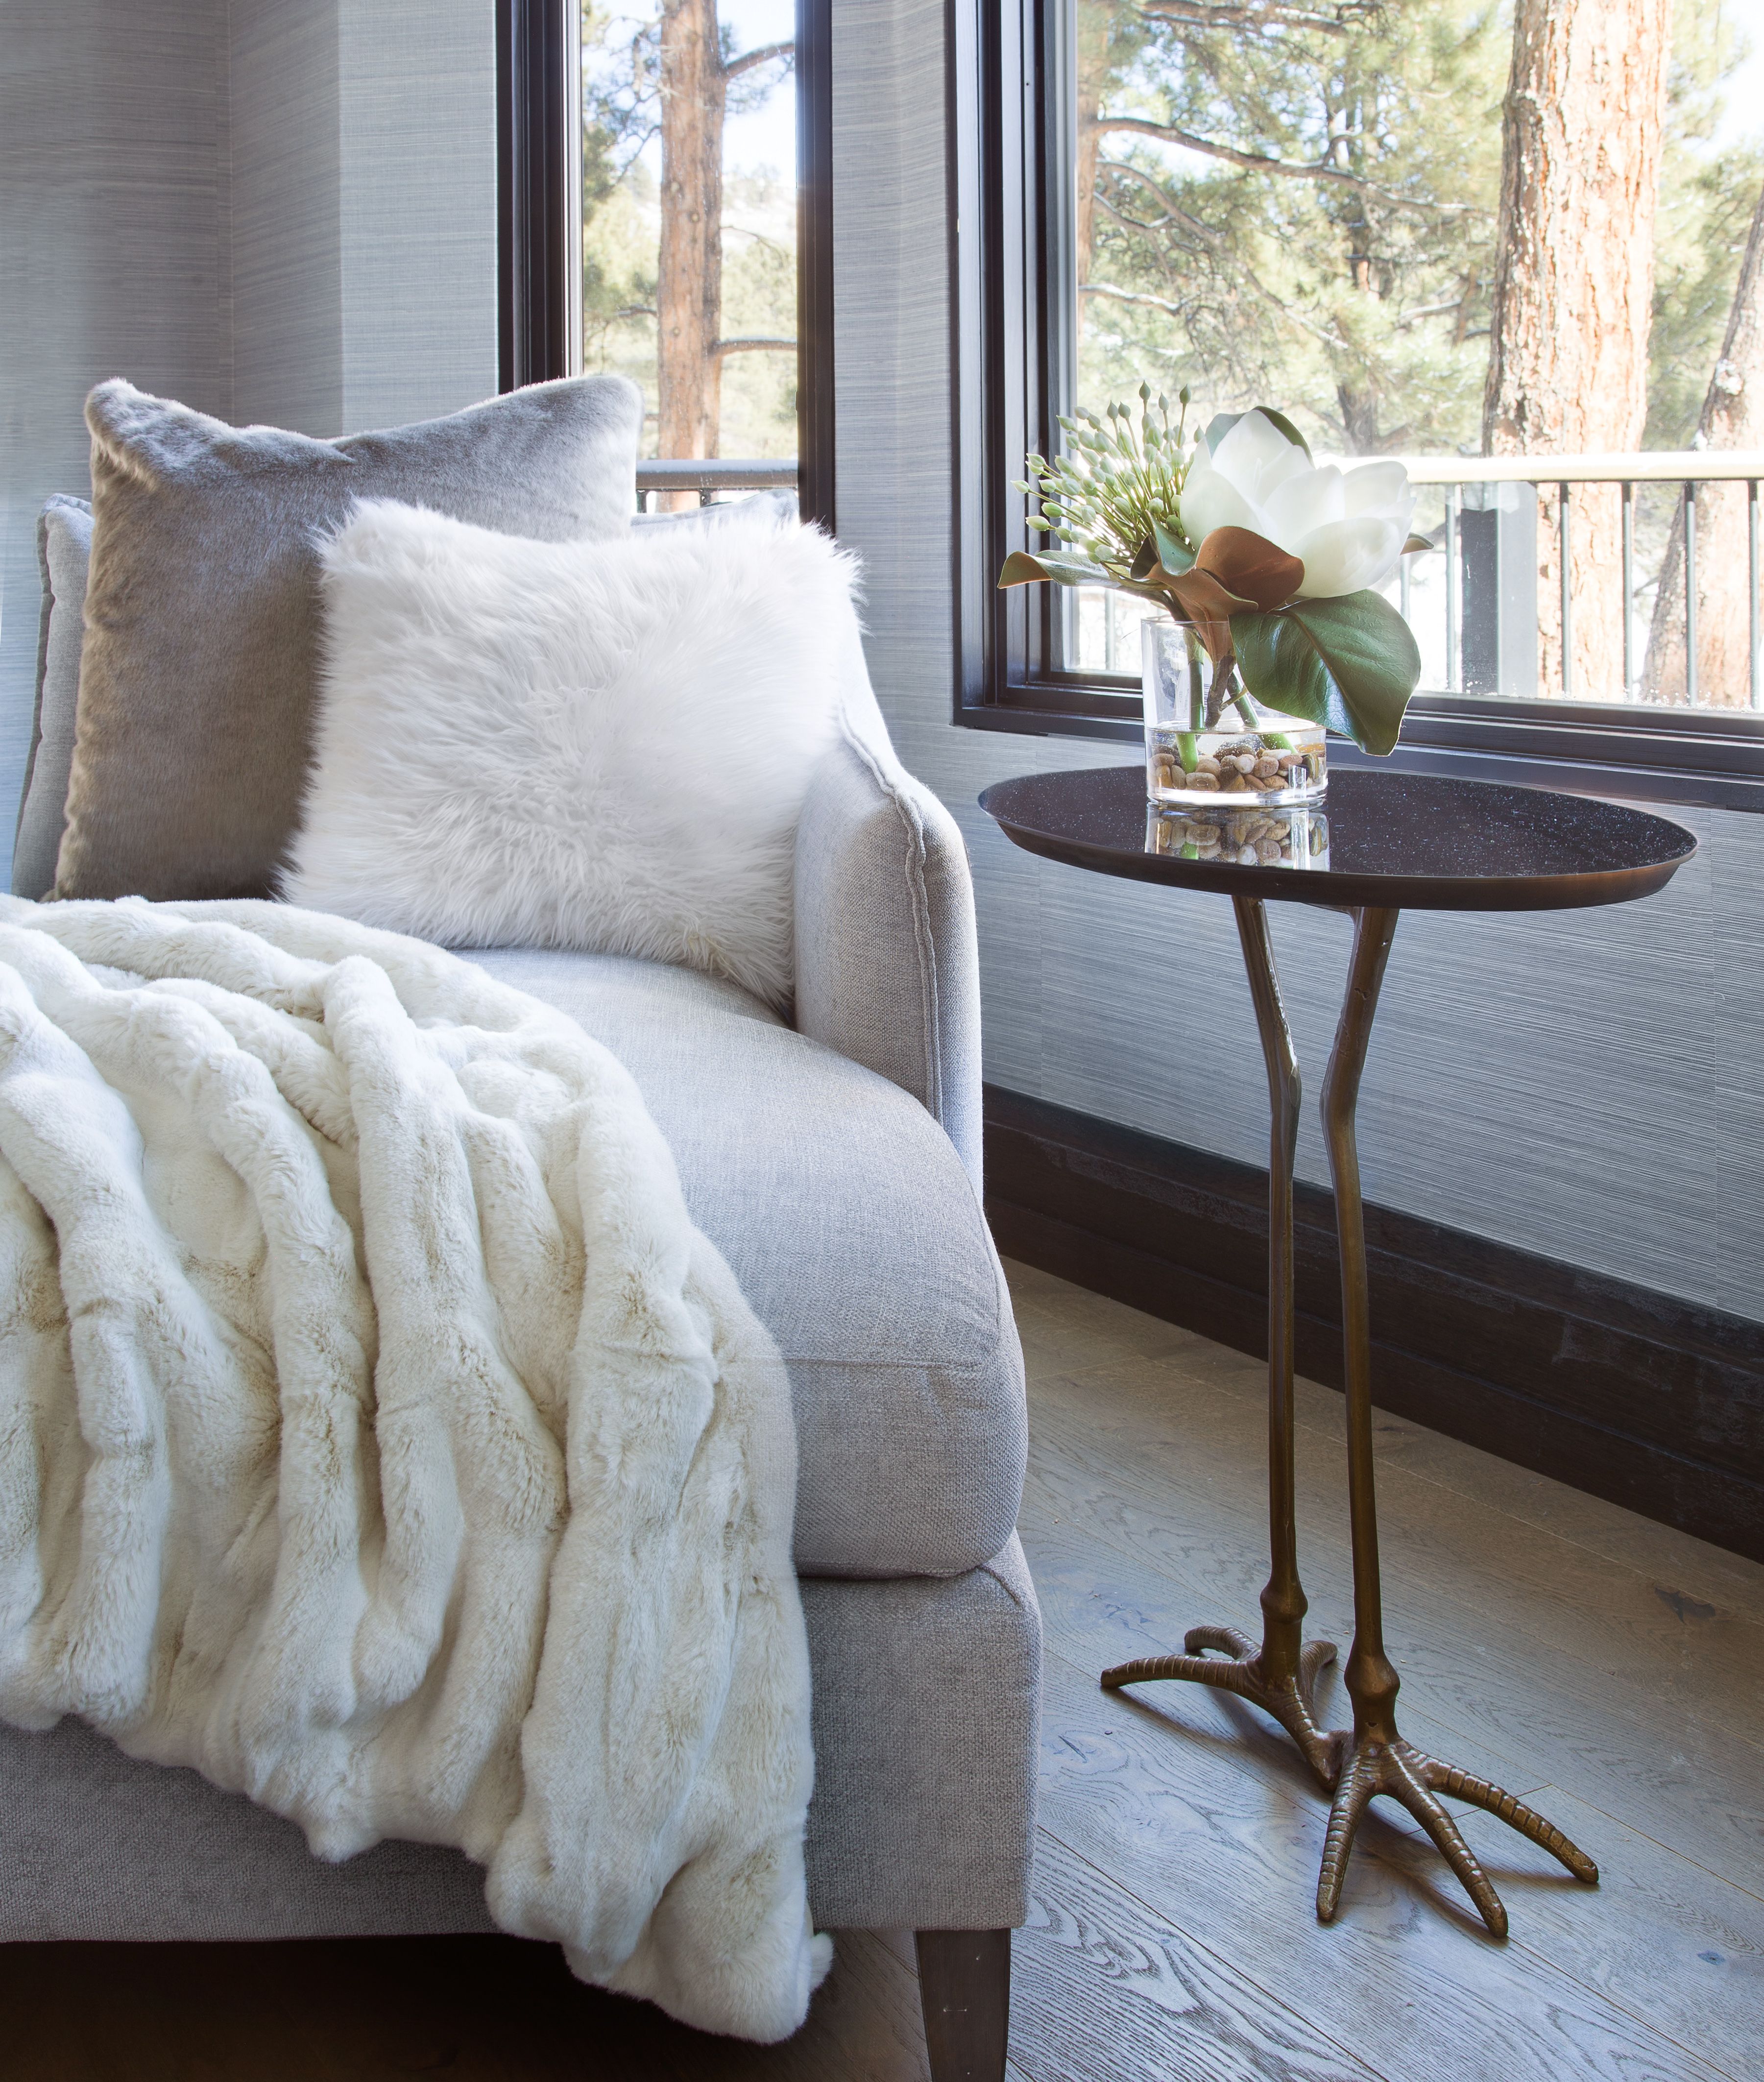 12 Winter Accessories for a Cozy Home Shopping Guide